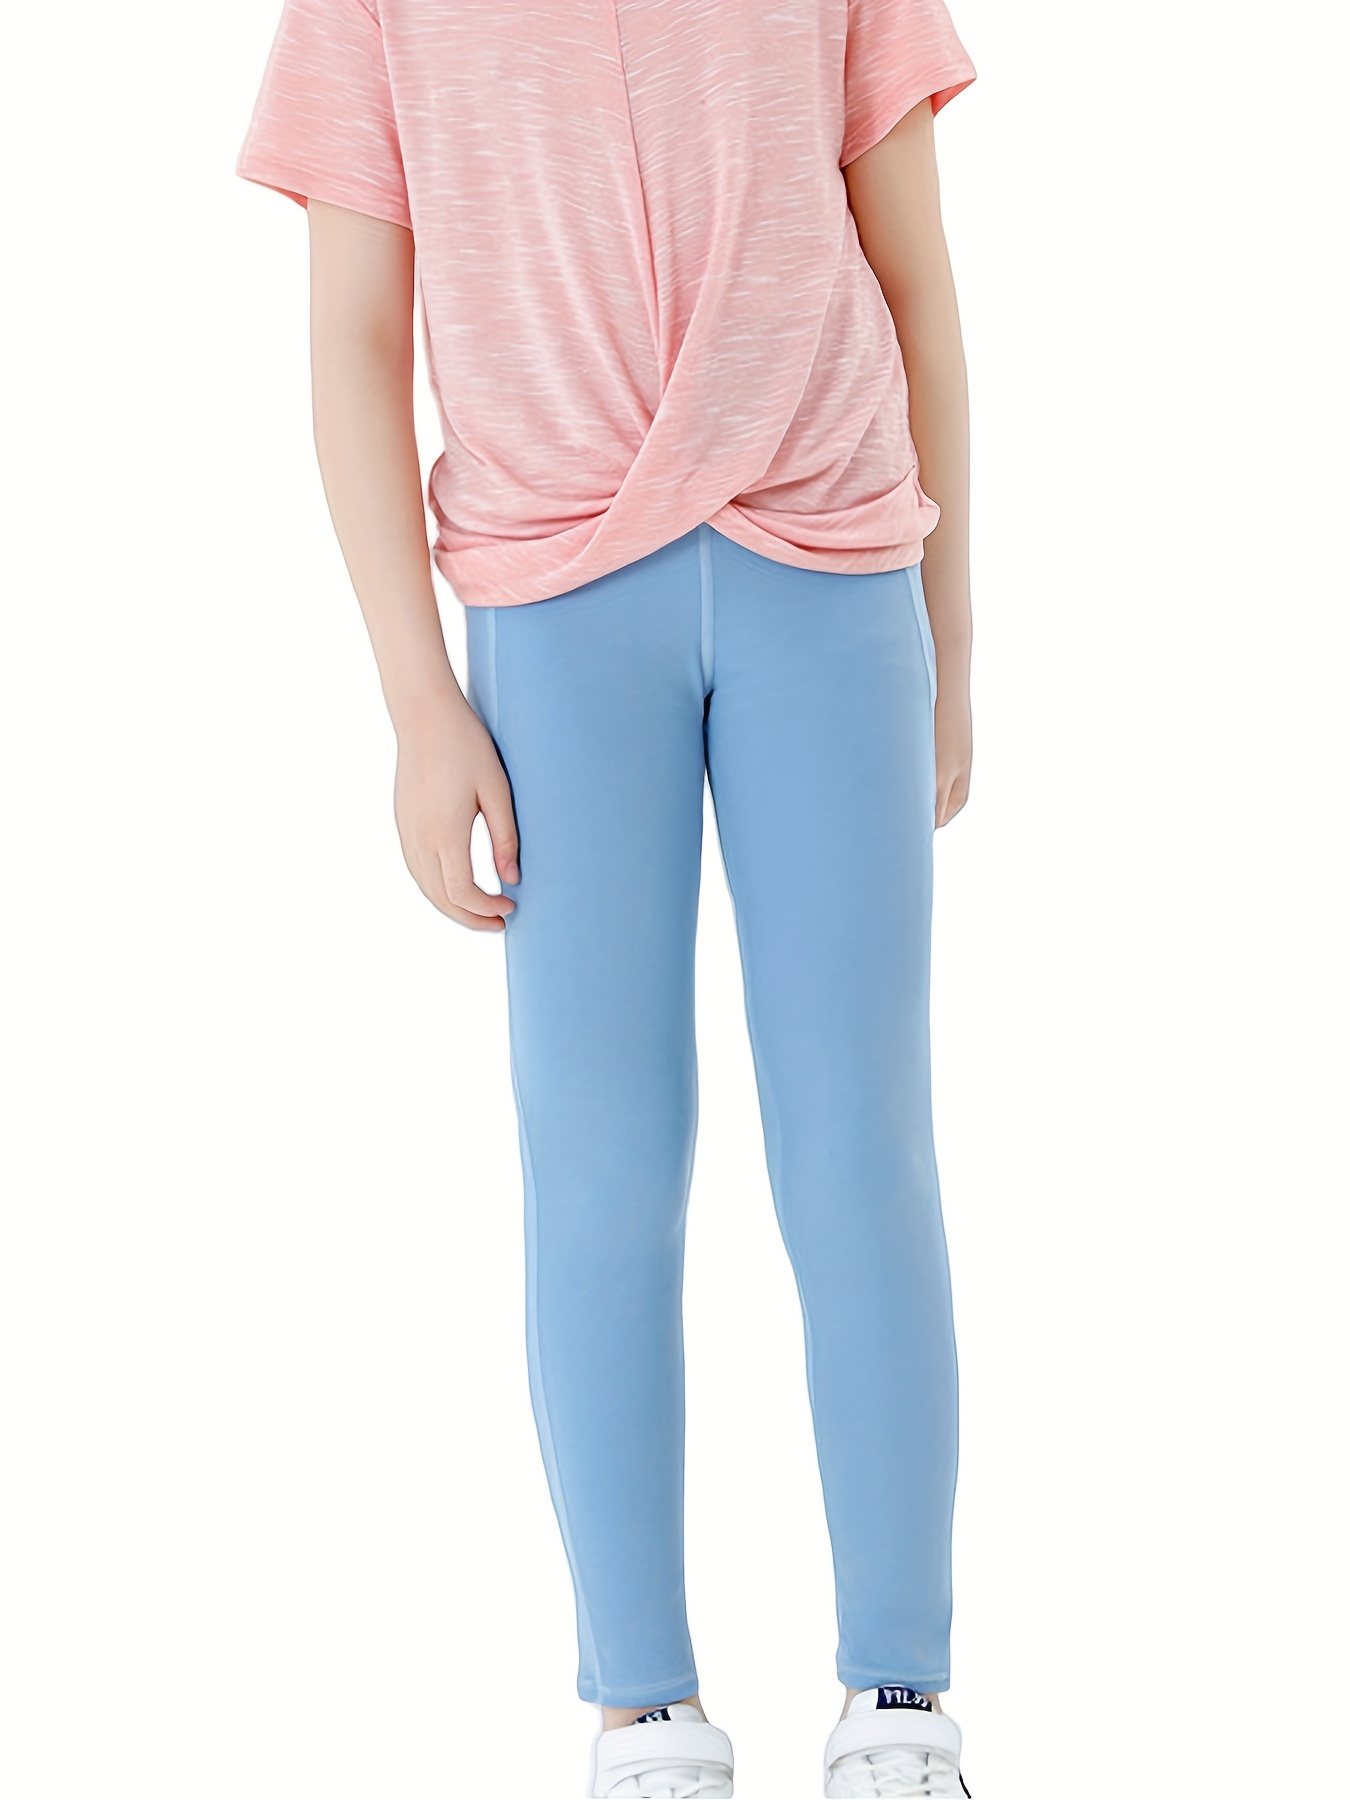 Tween Collection Tight Pants & Tights.